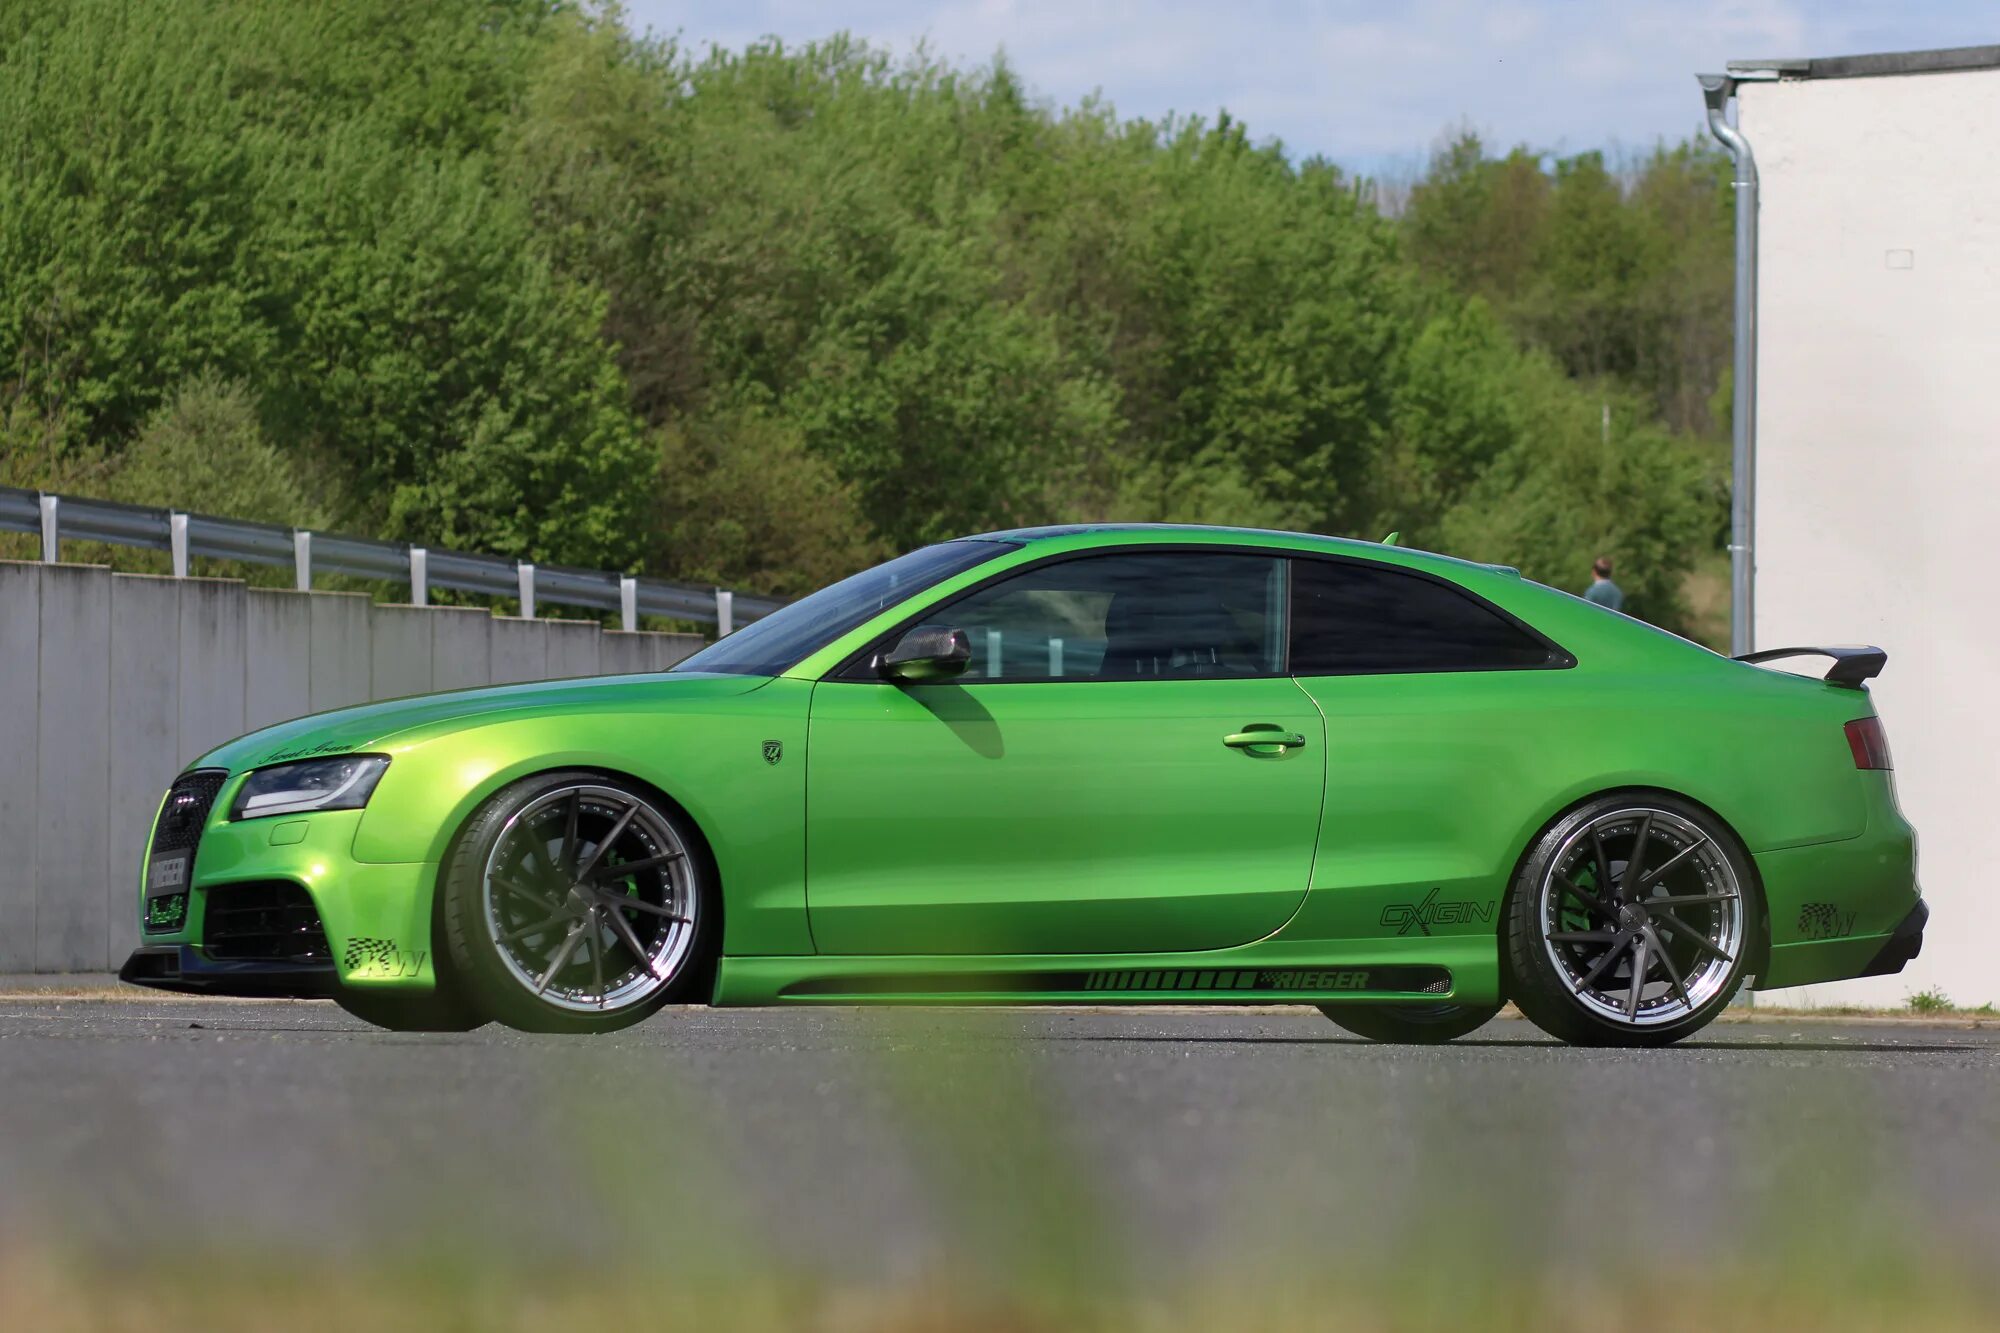 Audi a5 Tuning. Audi a5 Coupe Tuning. Ауди а5 купе зеленая. Audi a5 Coupe зеленая. Т б зеленая